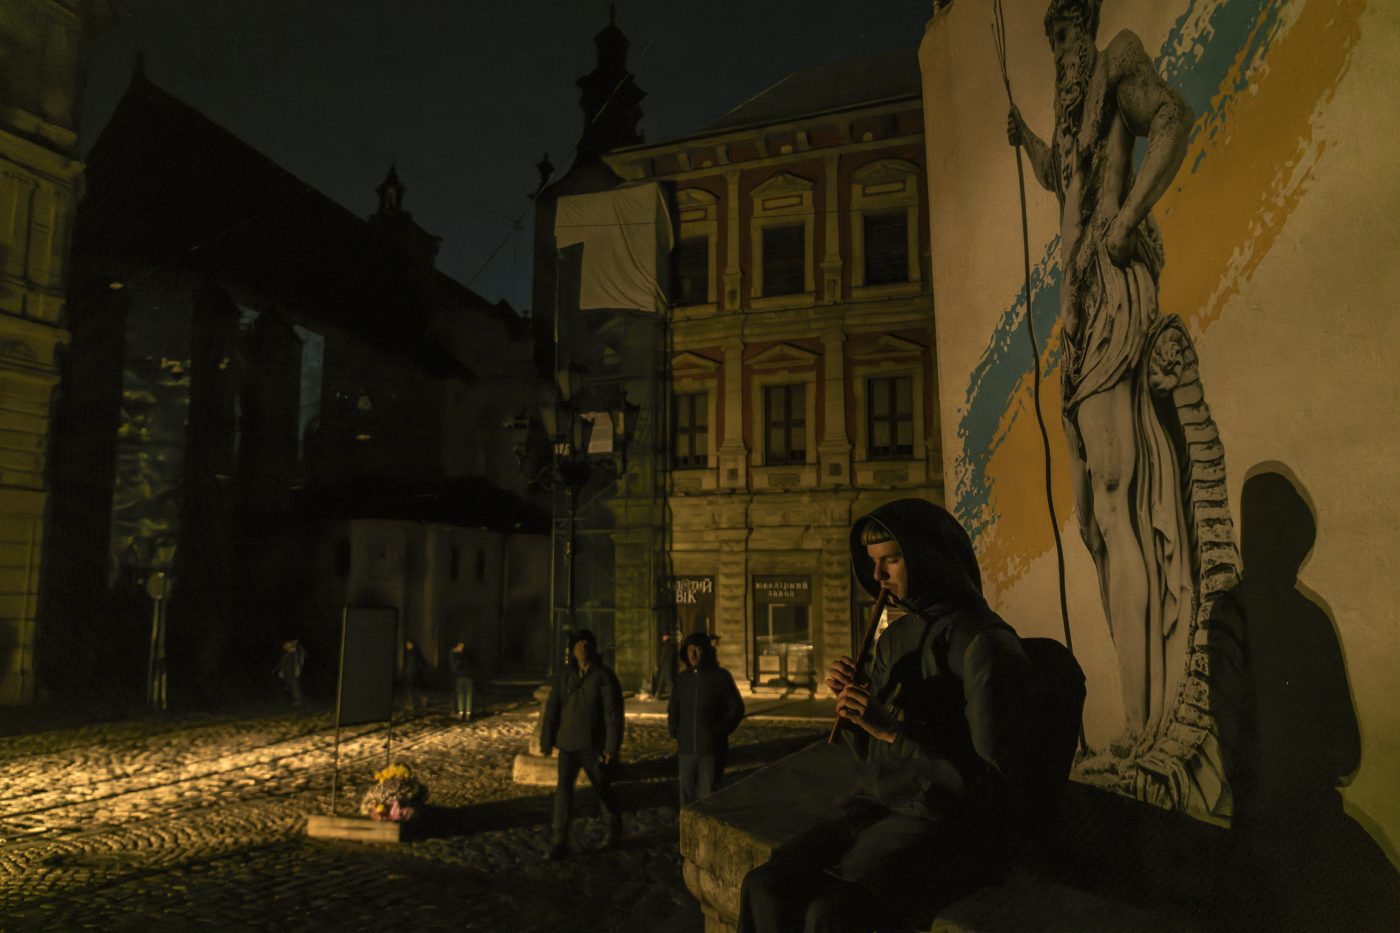 Photo: The person plays on the flute in the center of Lviv during a blackout after a massive Russian missile attack on Ukrainian power infrastructure, Ukraine, November 15, 2022 Credit: Photo by Maxym Marusenko/NurPhoto